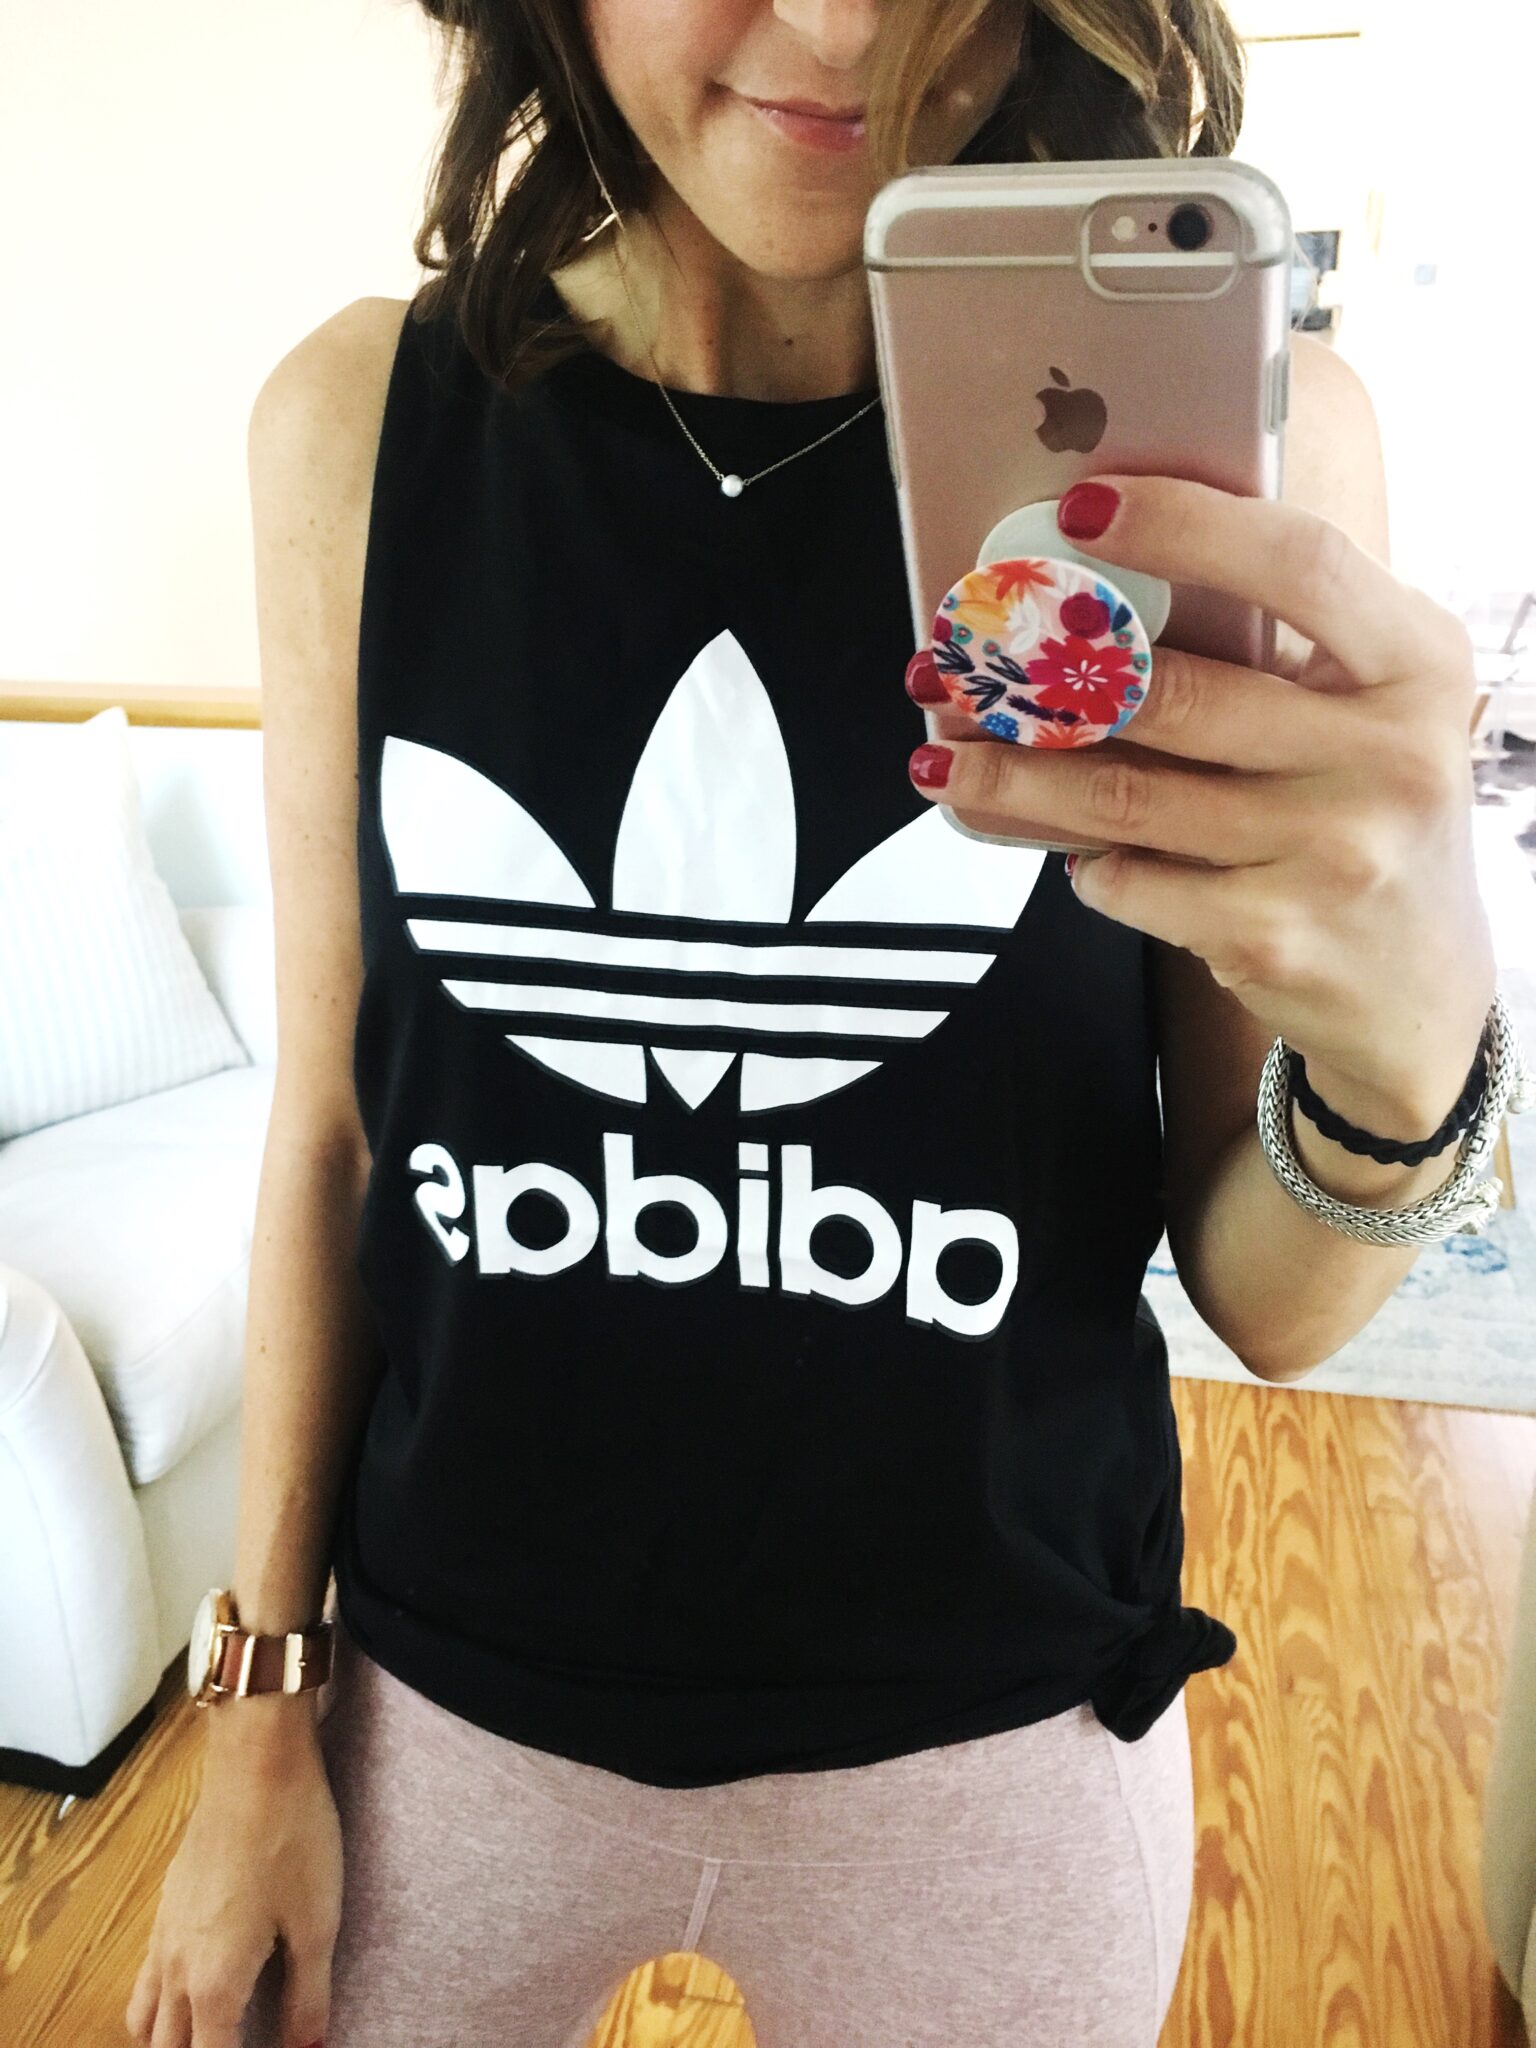 Adidas Workout Tank - Nordstrom Anniversary Sale Try On Session by popular Washington DC style blogger Cobalt Chronicles